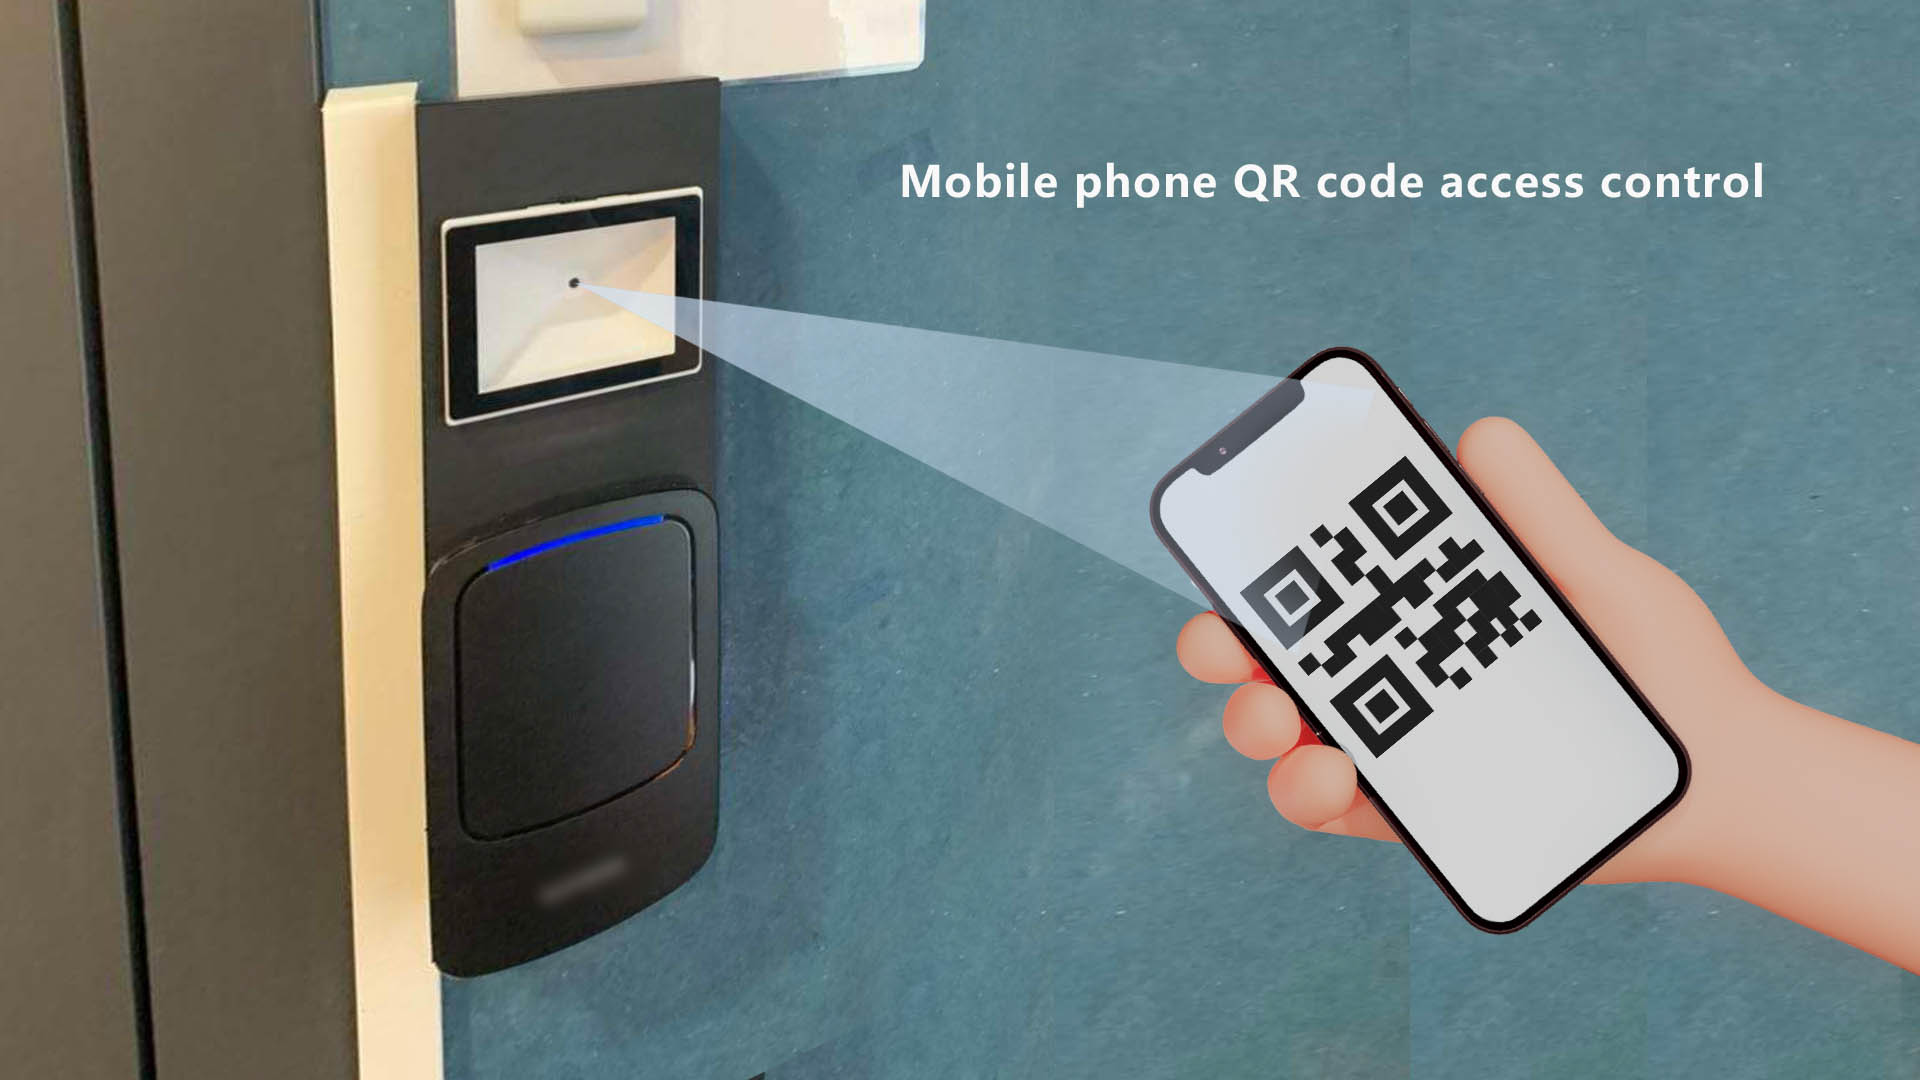 Application of Mobile Phone QR Code Access Control in Smart Community 